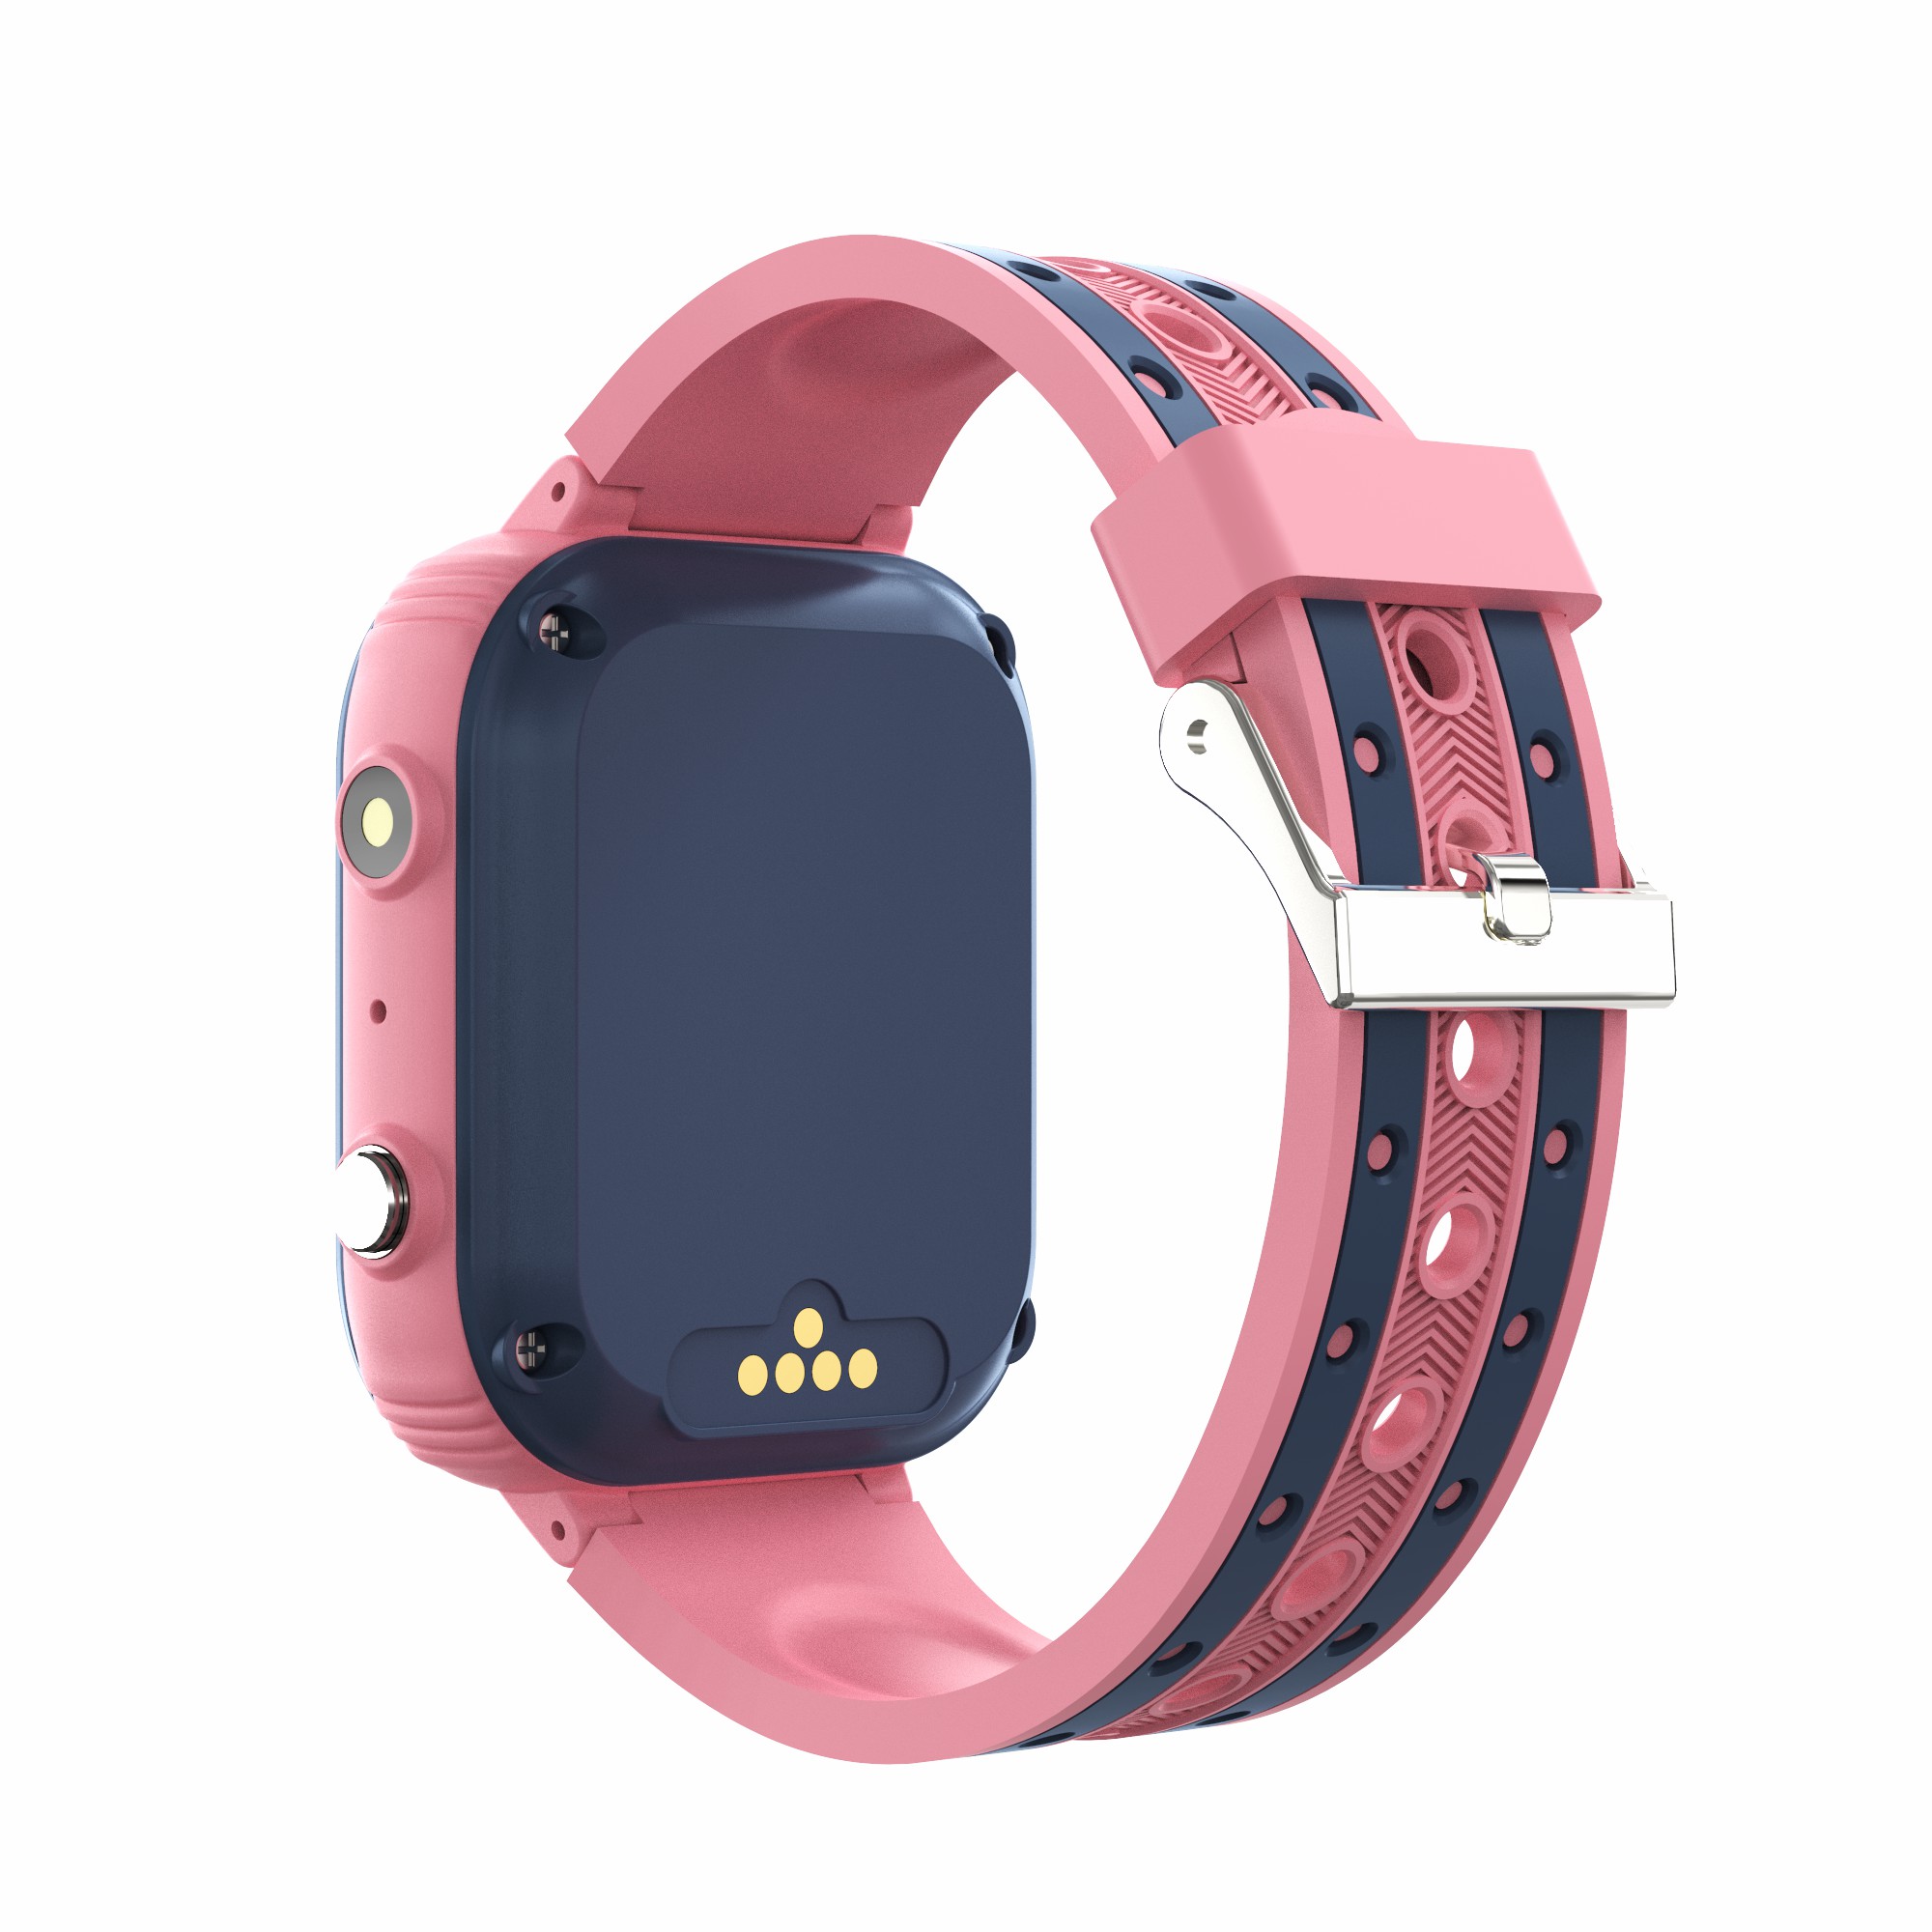 China Manufacture 4G IP67 Waterproof Accurate Positioning Video Call Safety SOS Emergency Help Smart Watch GPS Tracker with SIM Card Slot D53